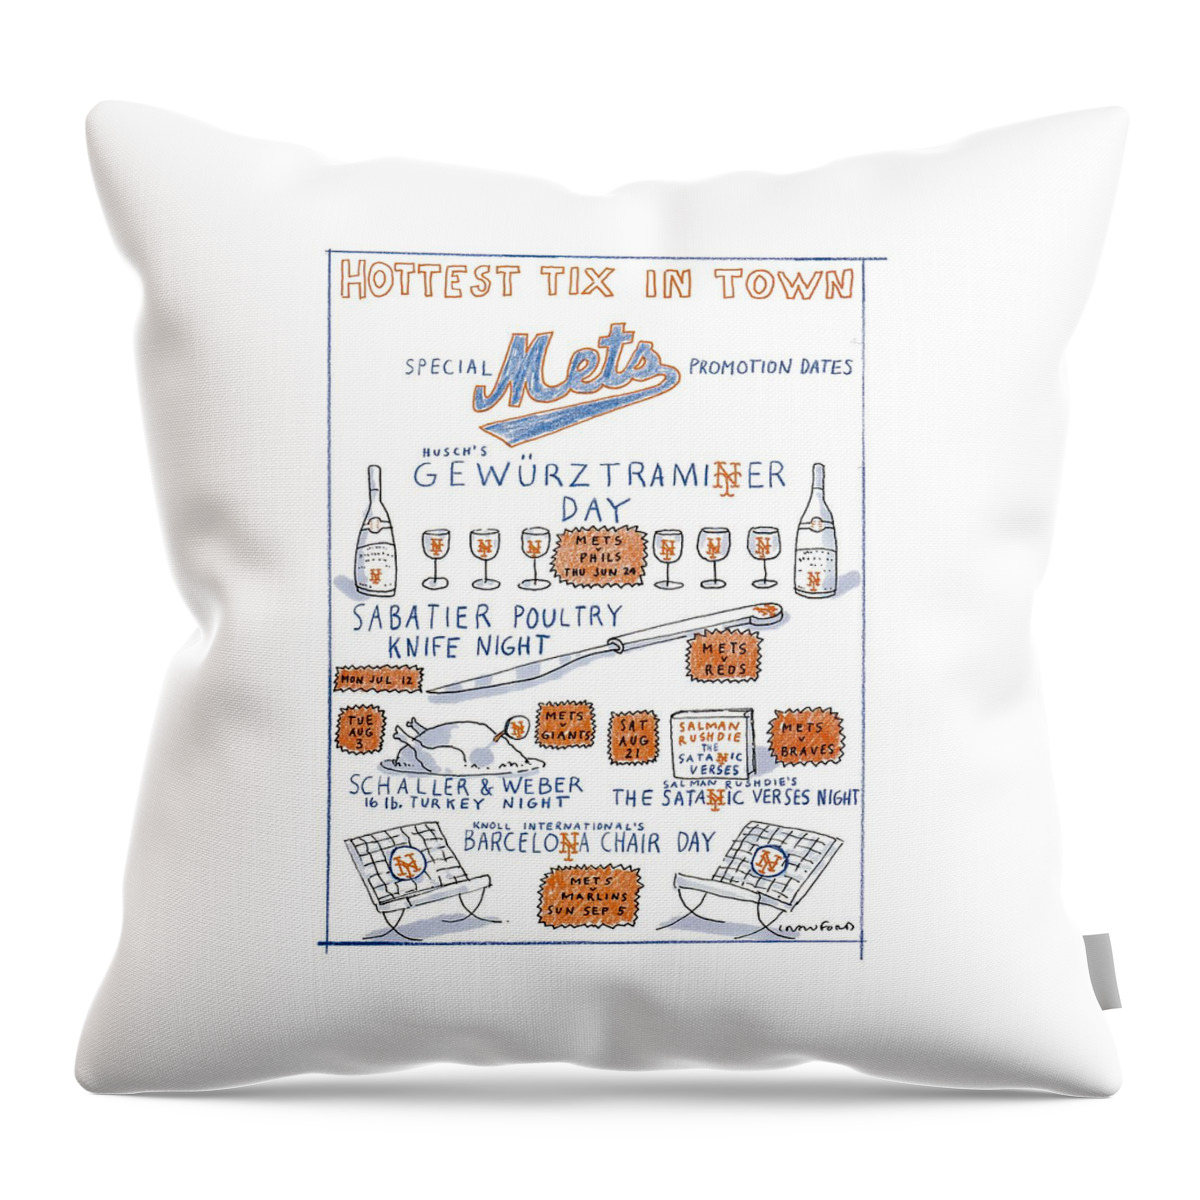 Hottest Tix In Town
Special Mets Promotion Dates Throw Pillow